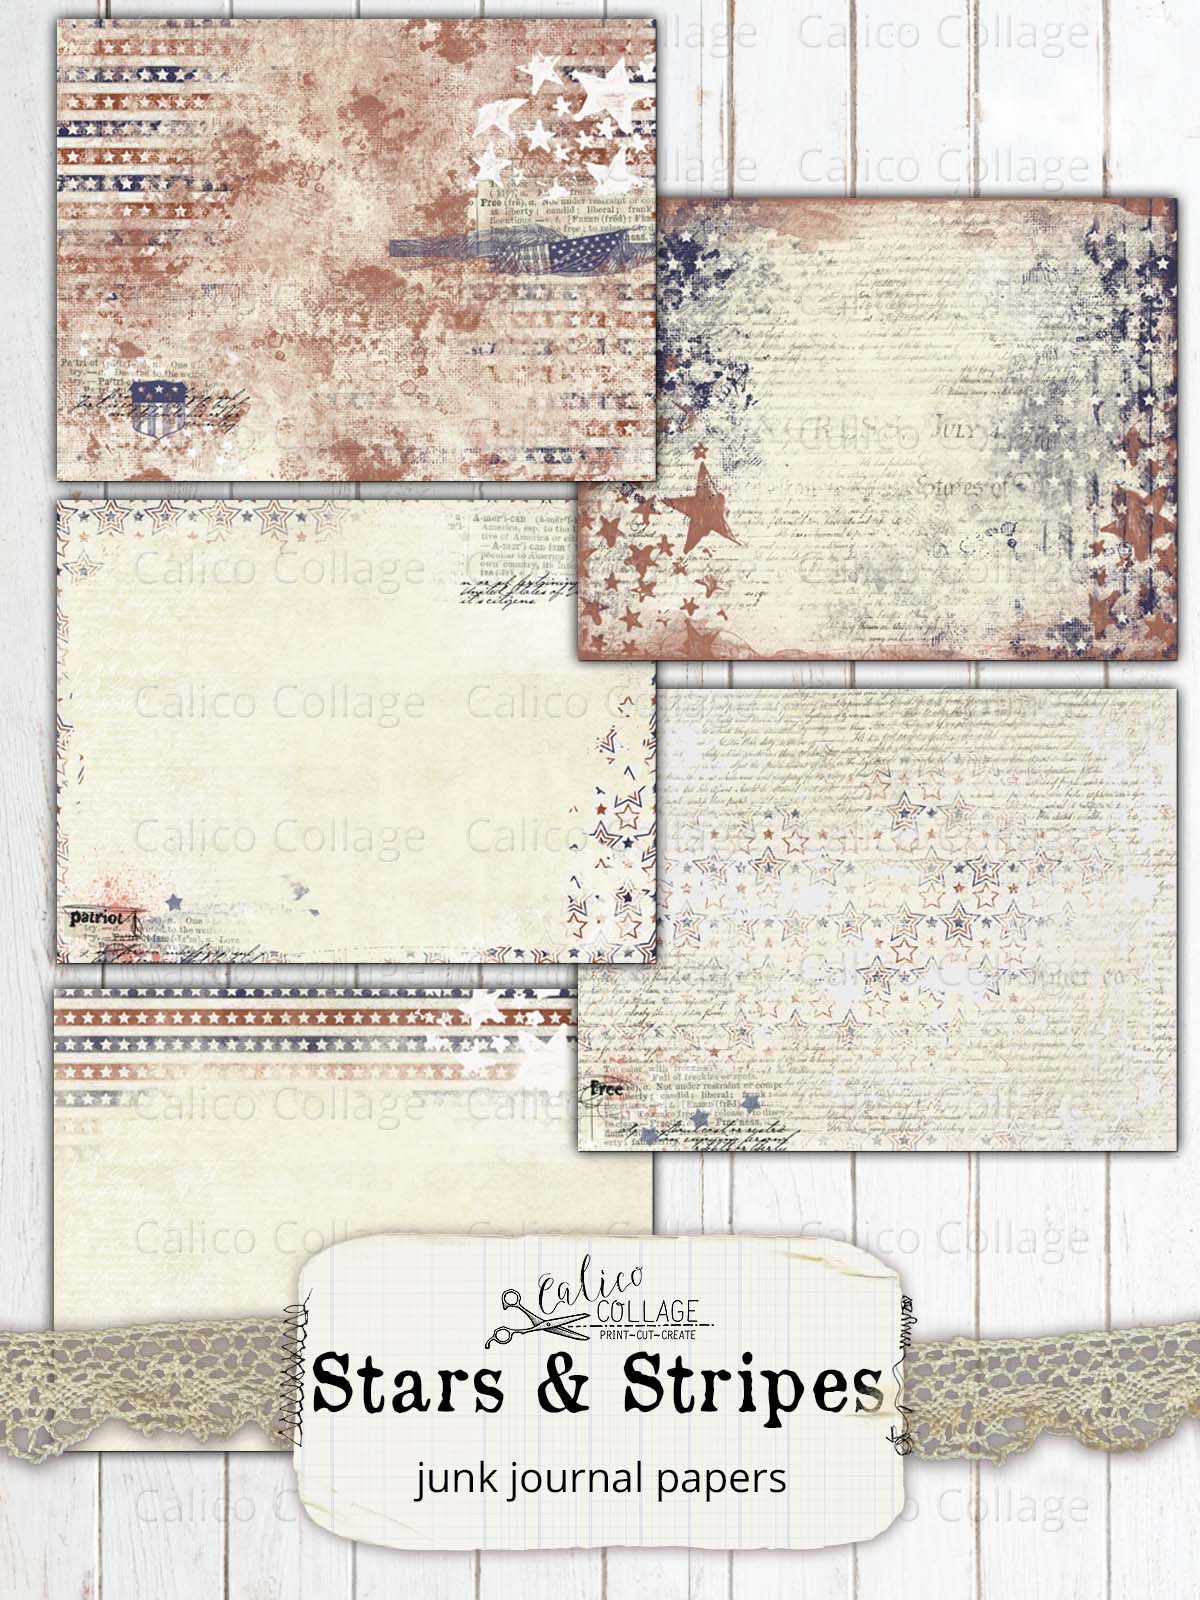 Stars & Stripes Junk Journal Papers